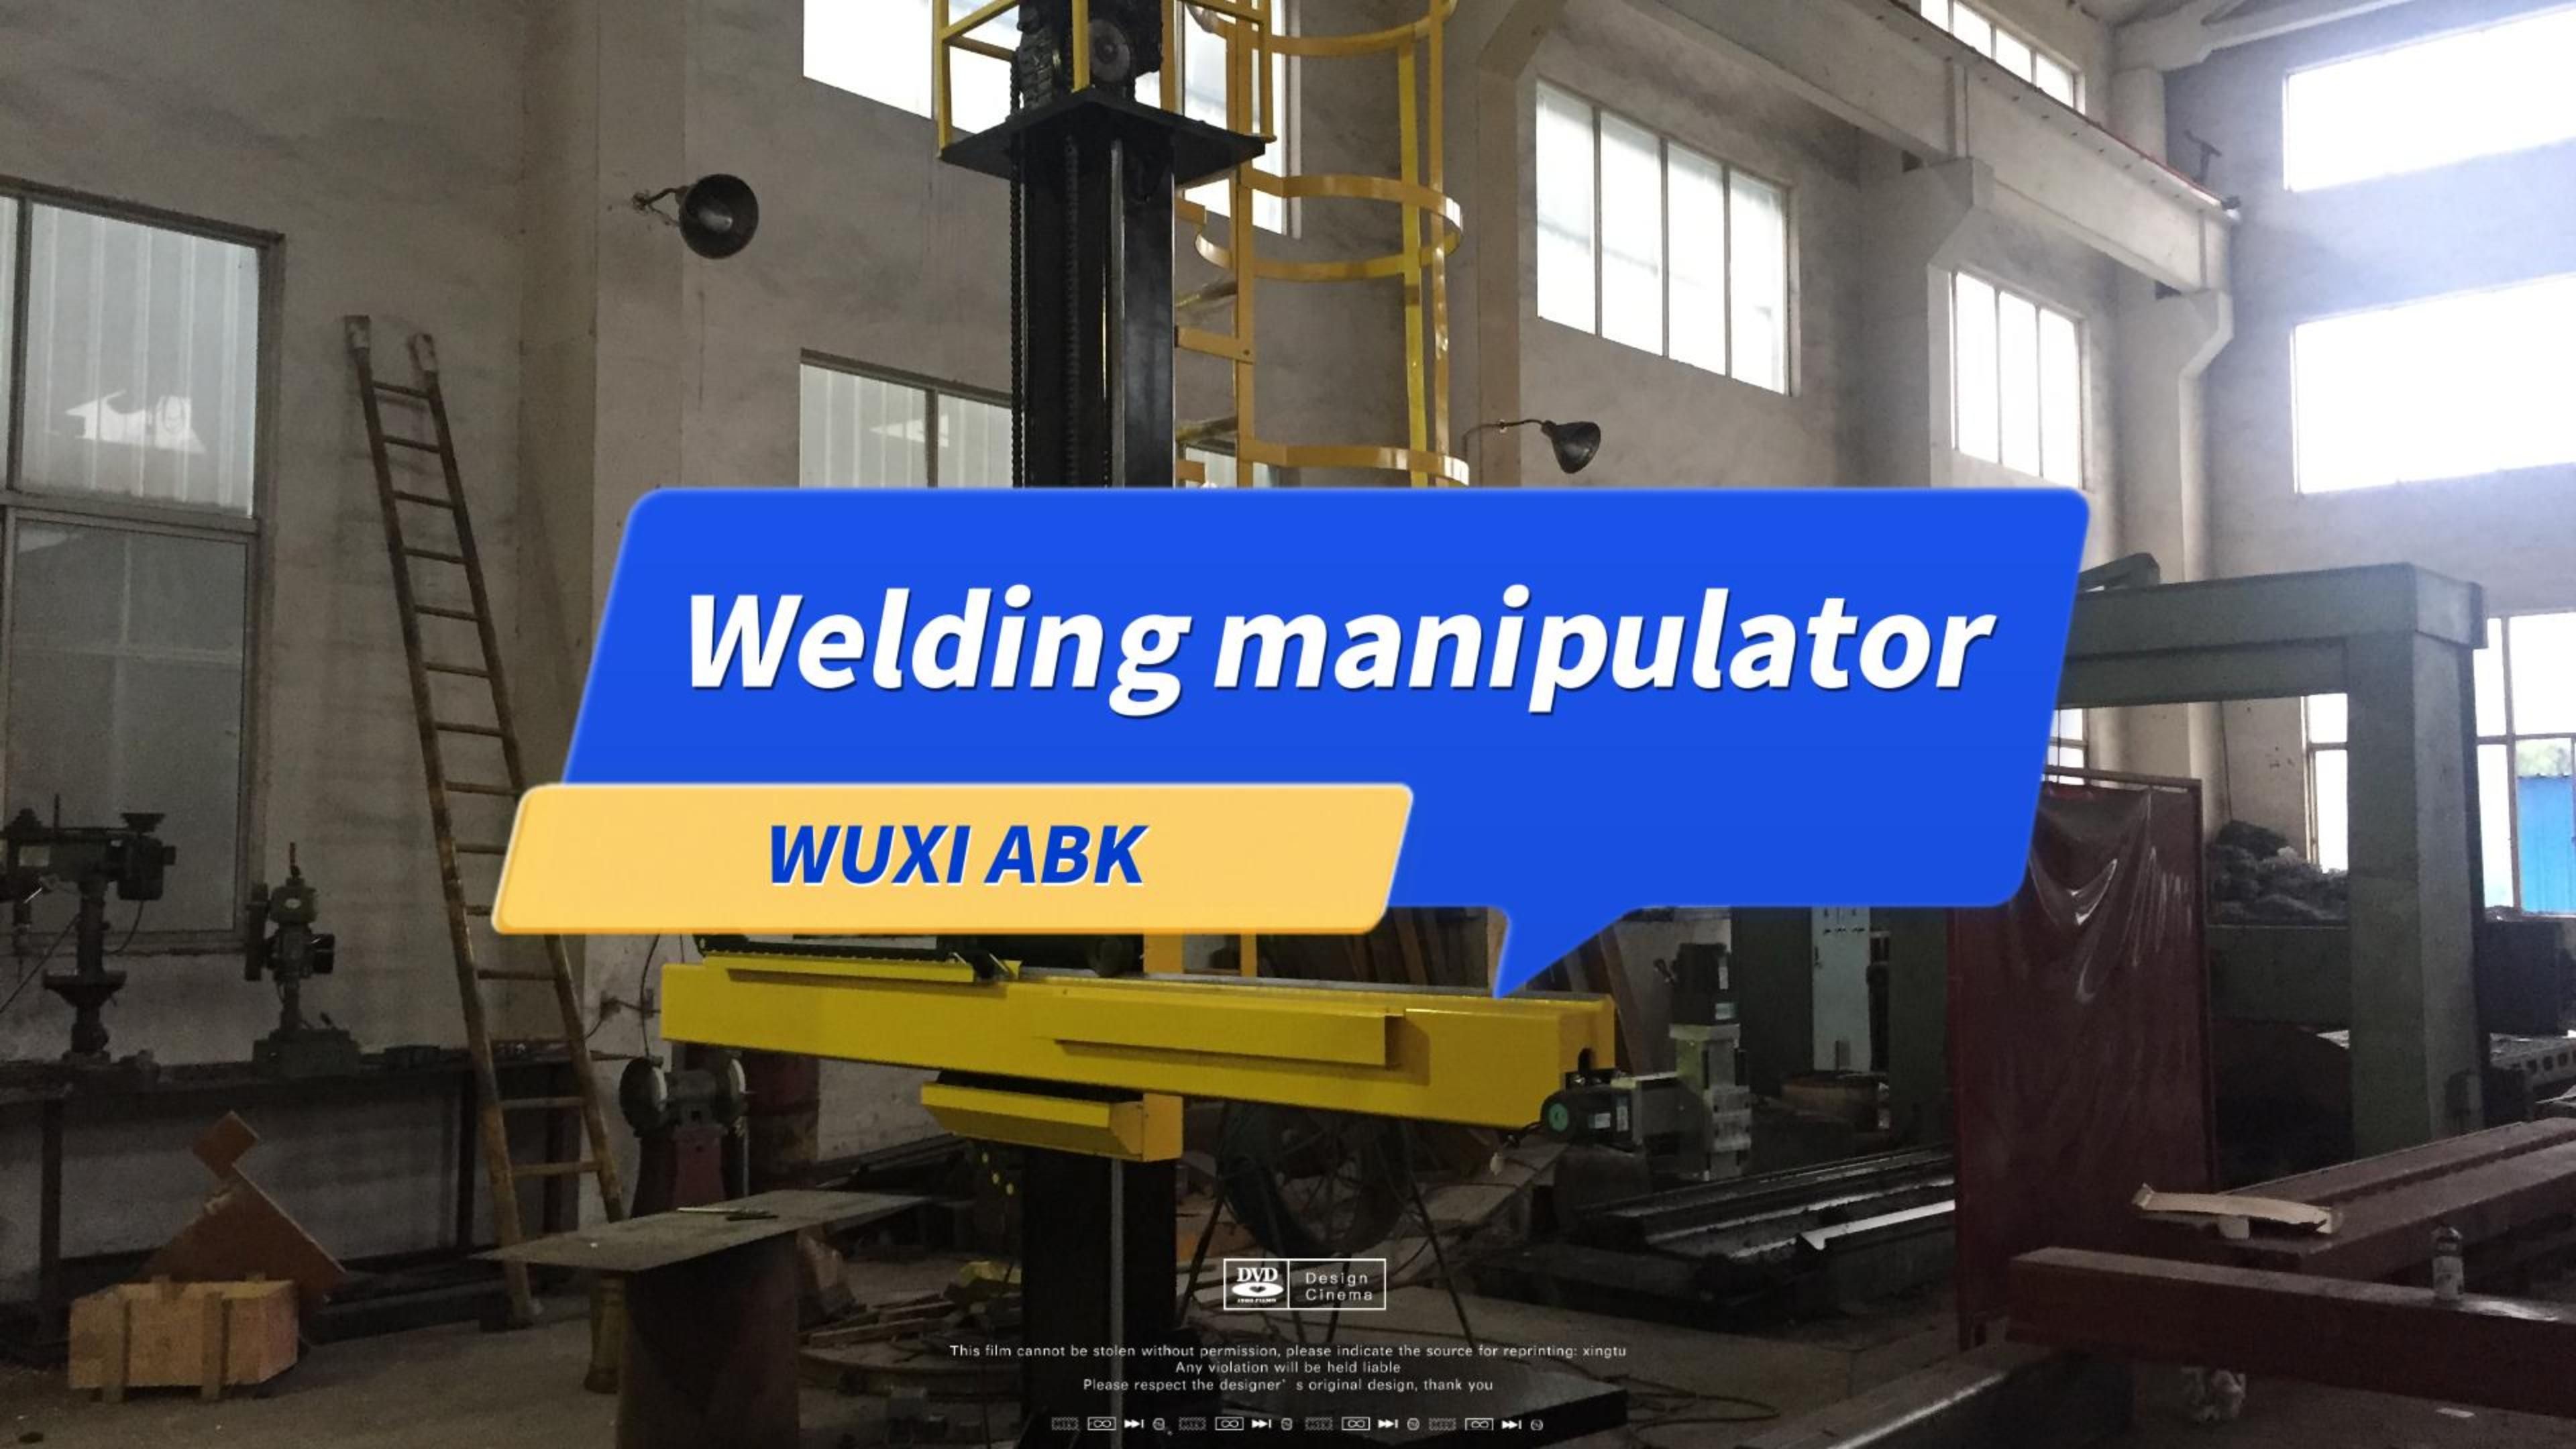 To improve welding efficiency and quality control, Welding Manipulator has become a right-hand man in industry.